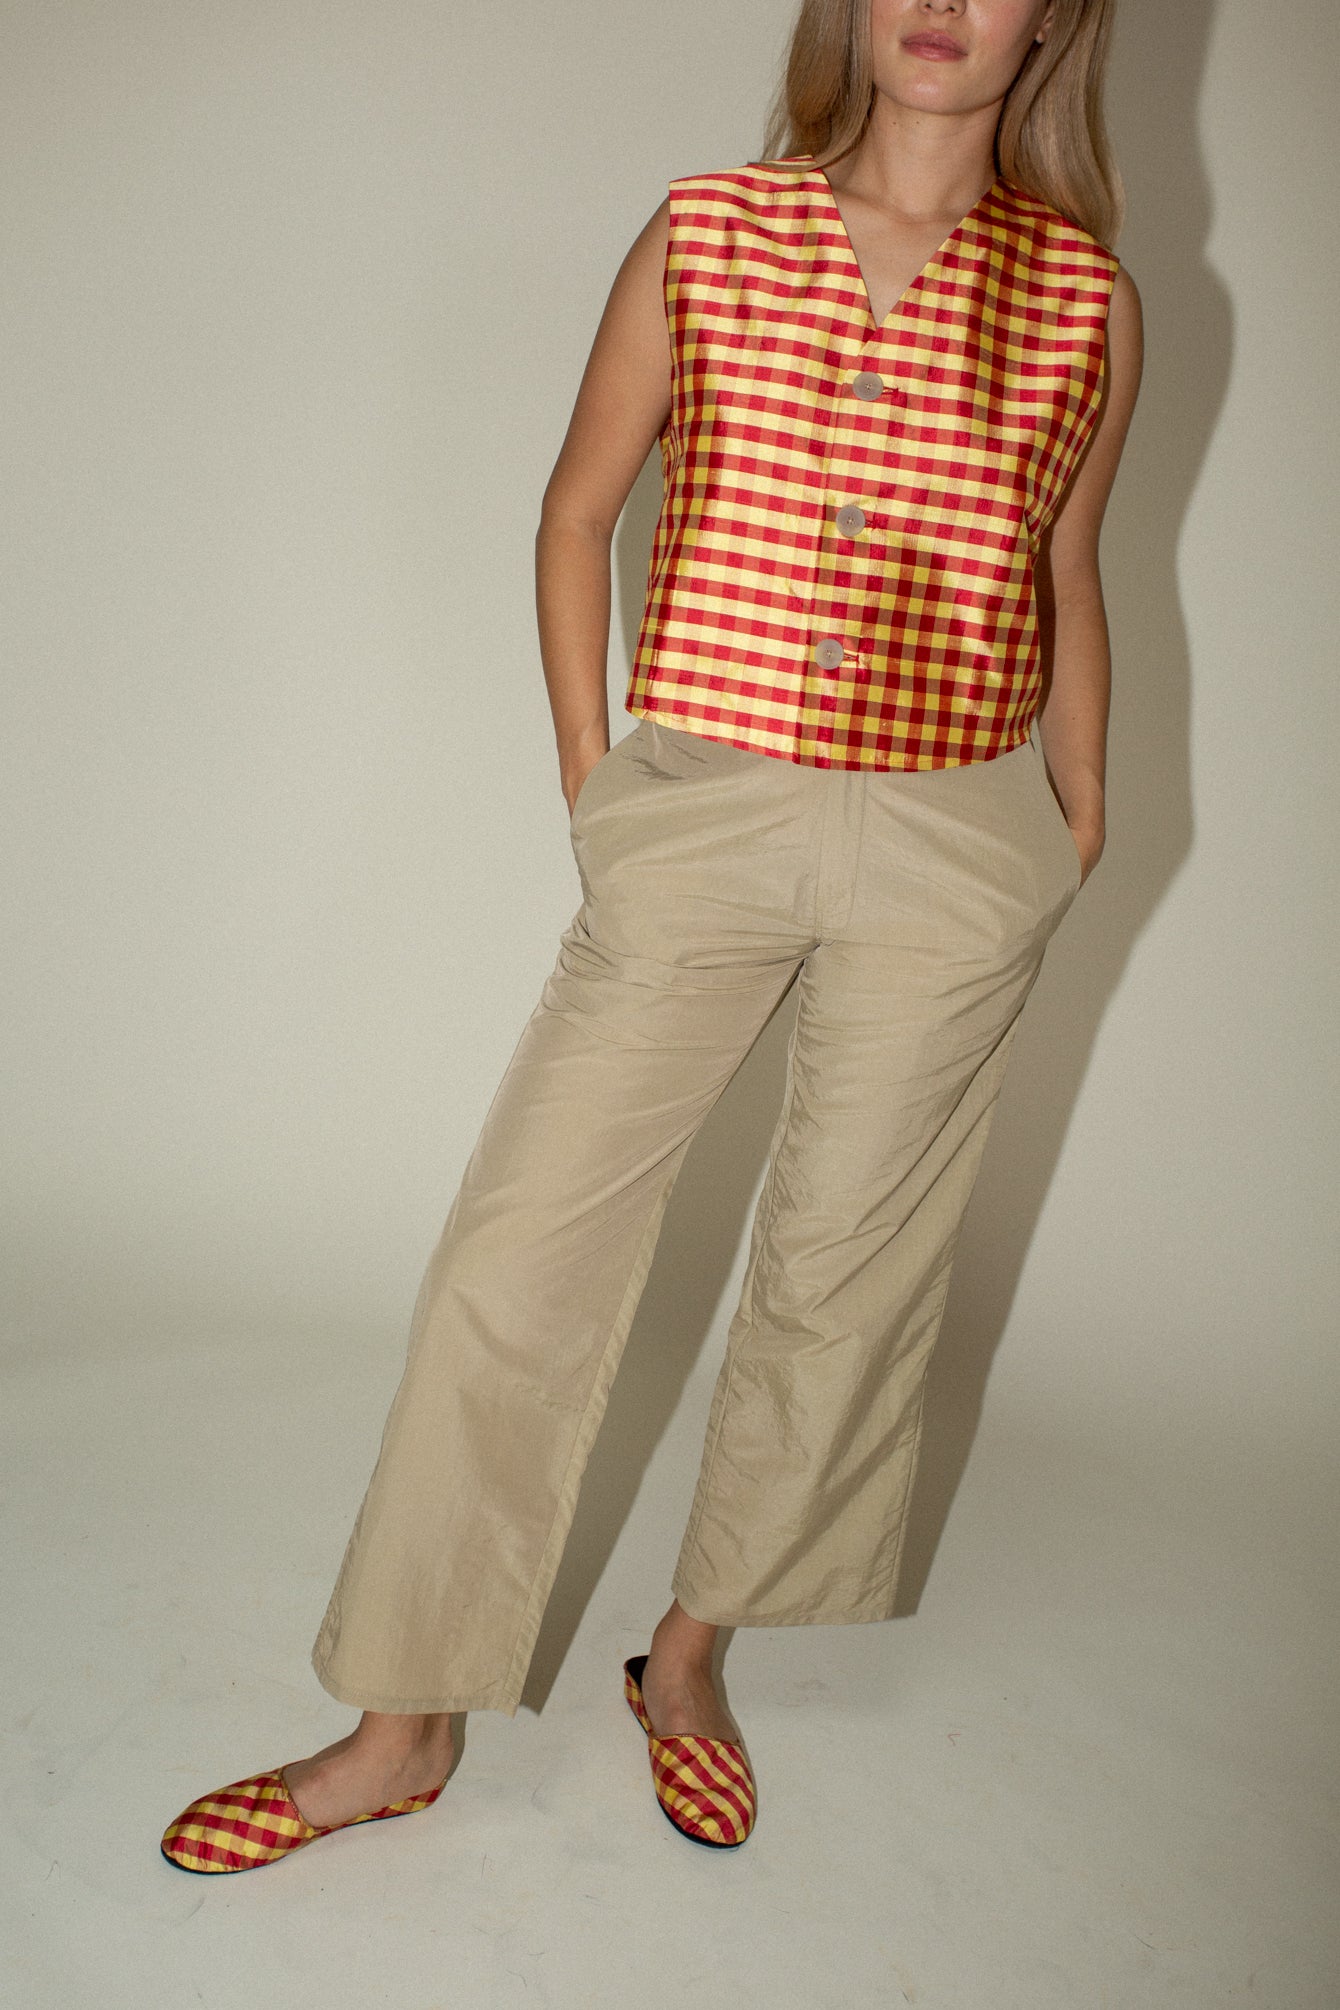 Coming of Age Vest in Red/Yellow Gingham